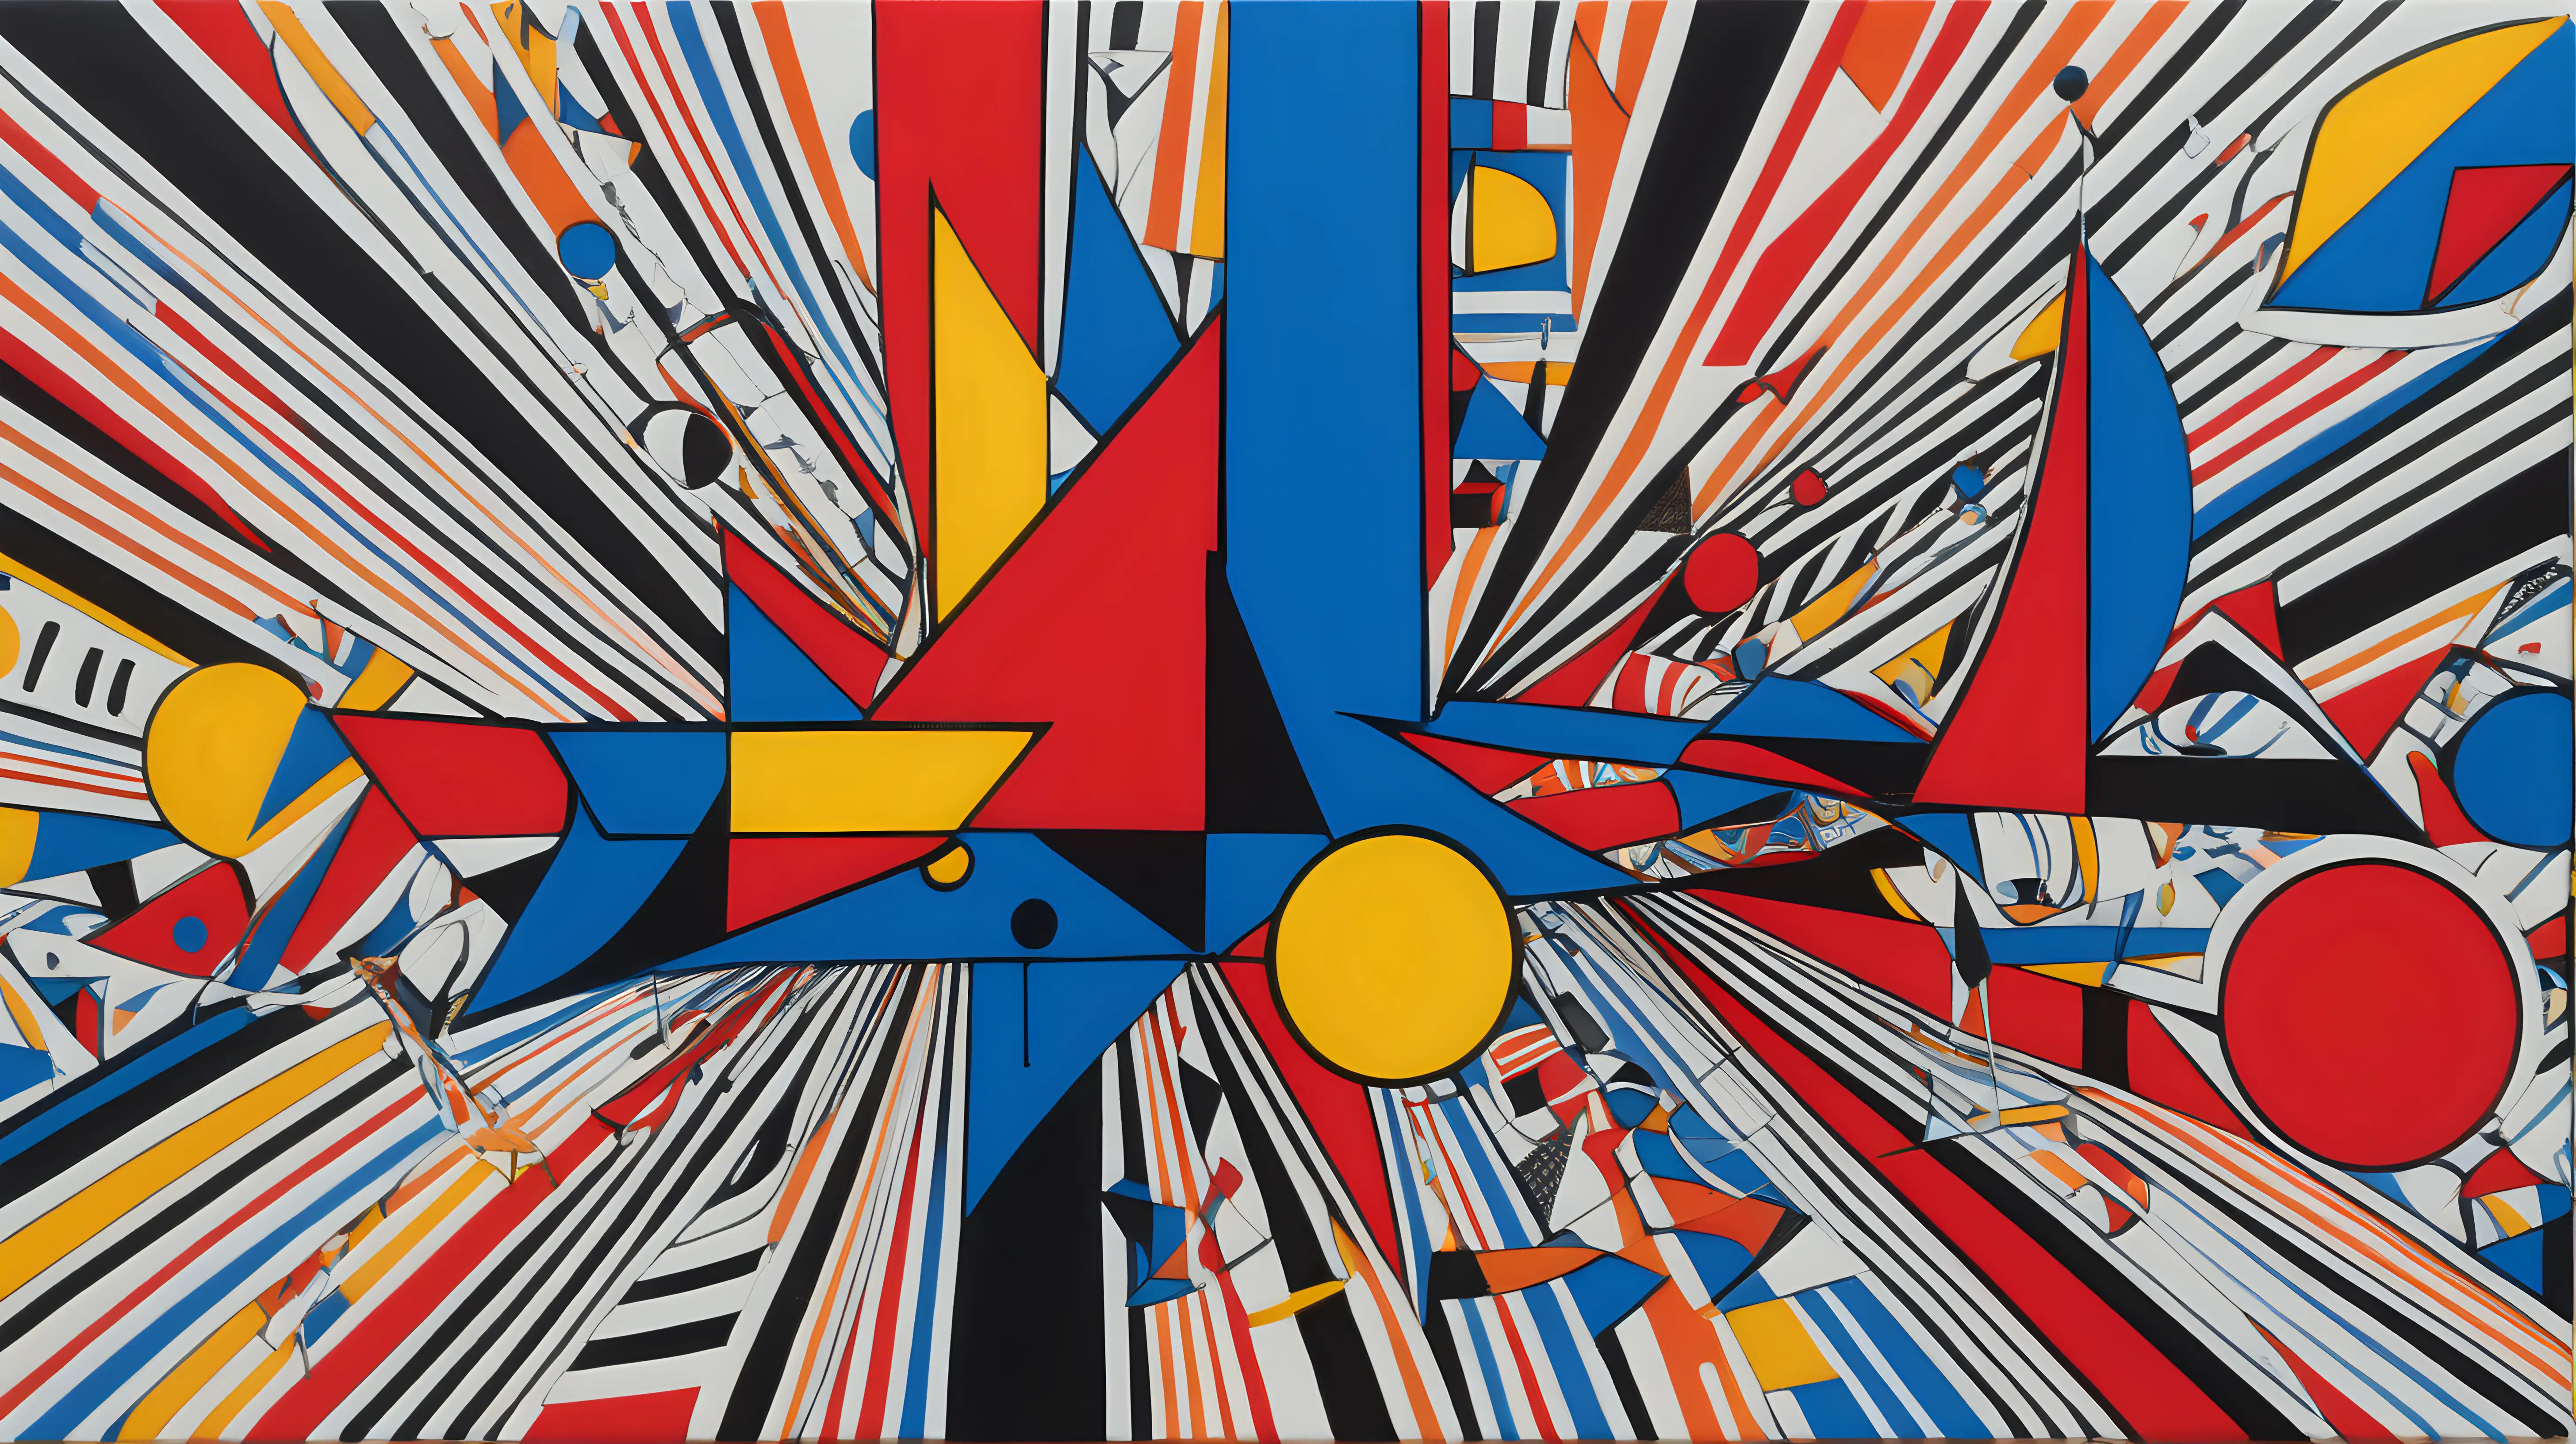 Vibrant Intersecting Lines and Shapes in Primary Colors Artwork